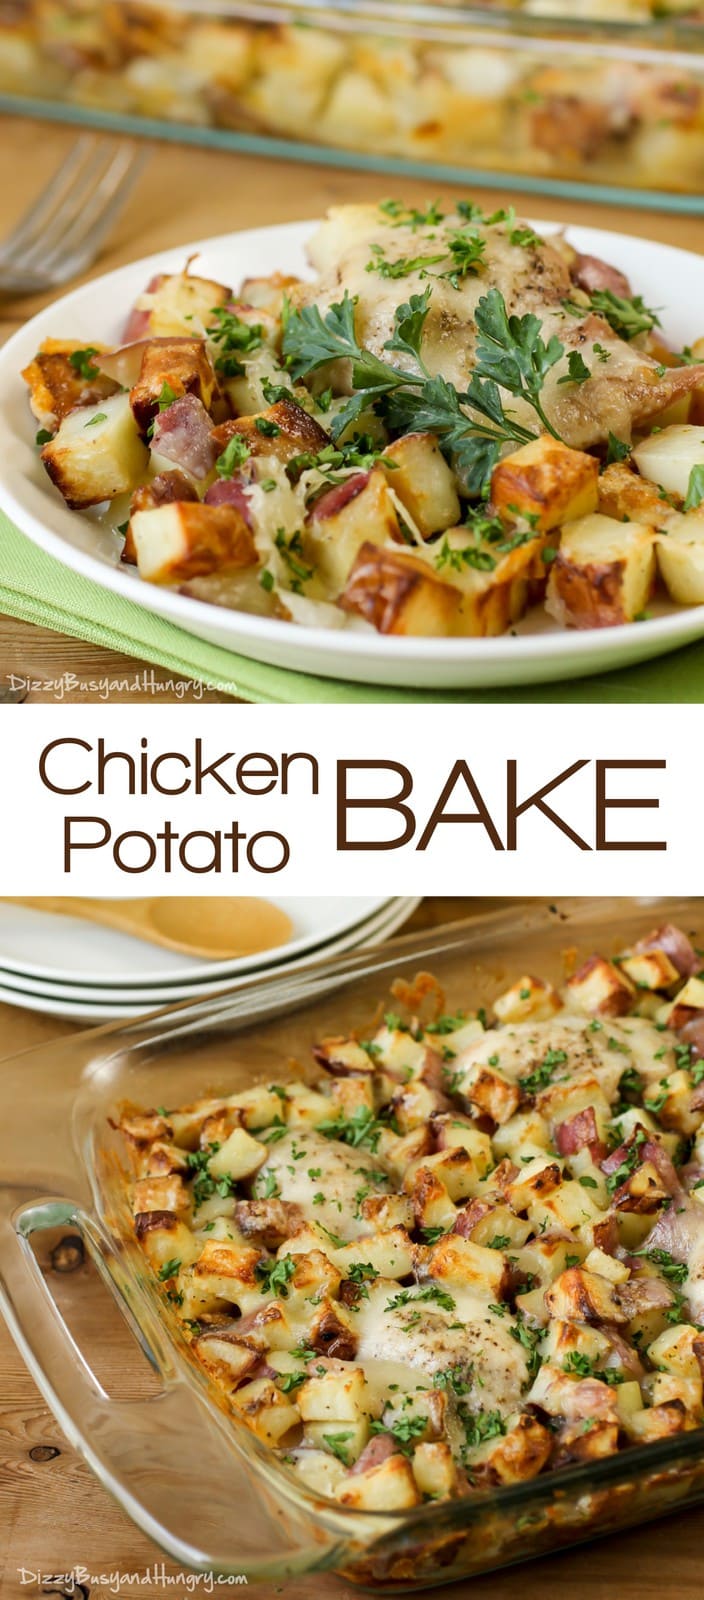 Chicken Potato Bake | Dizzy Busy and Hungry! Recipes